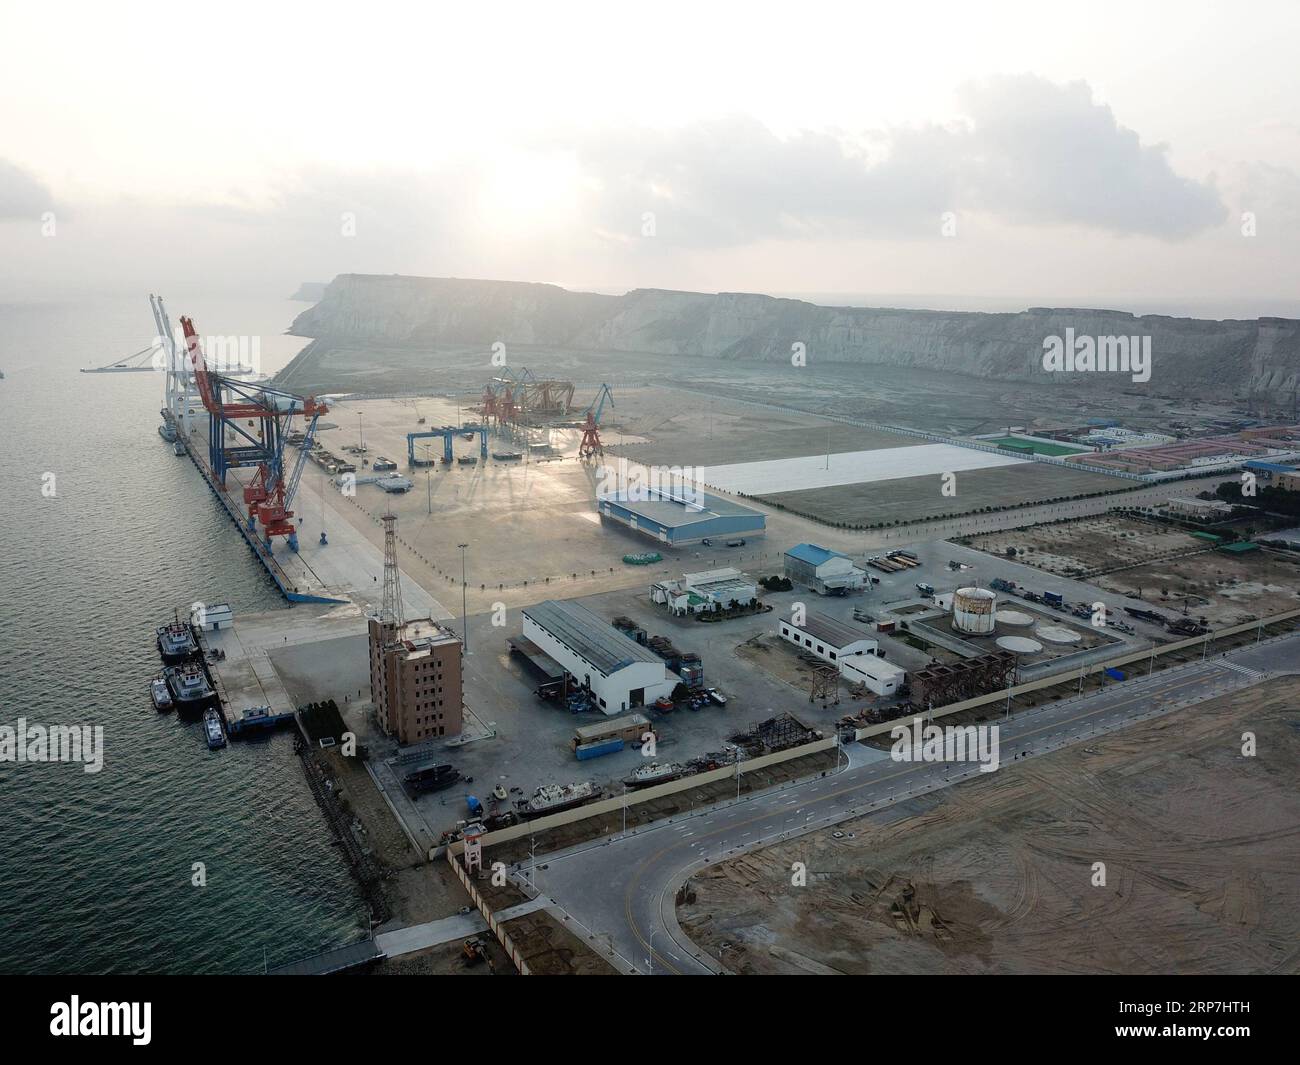 (190207) -- BEIJING, Feb. 7, 2019 -- Photo taken on Jan. 29, 2018 shows a view of Gwadar Port in southwest Pakistan s Gwadar. Pakistani Prime Minister Imran Khan said on Wednesday that the China-Pakistan Economic Corridor (CPEC) will bring a host of economic opportunities for the country s southwest Balochistan province, local reports said. During his conversation with political representatives of the Balochistan Awami Party, the prime minister said that development of Gwadar port will open a new era of prosperity in Balochistan by creating vast opportunities for the people of the province, AR Stock Photo